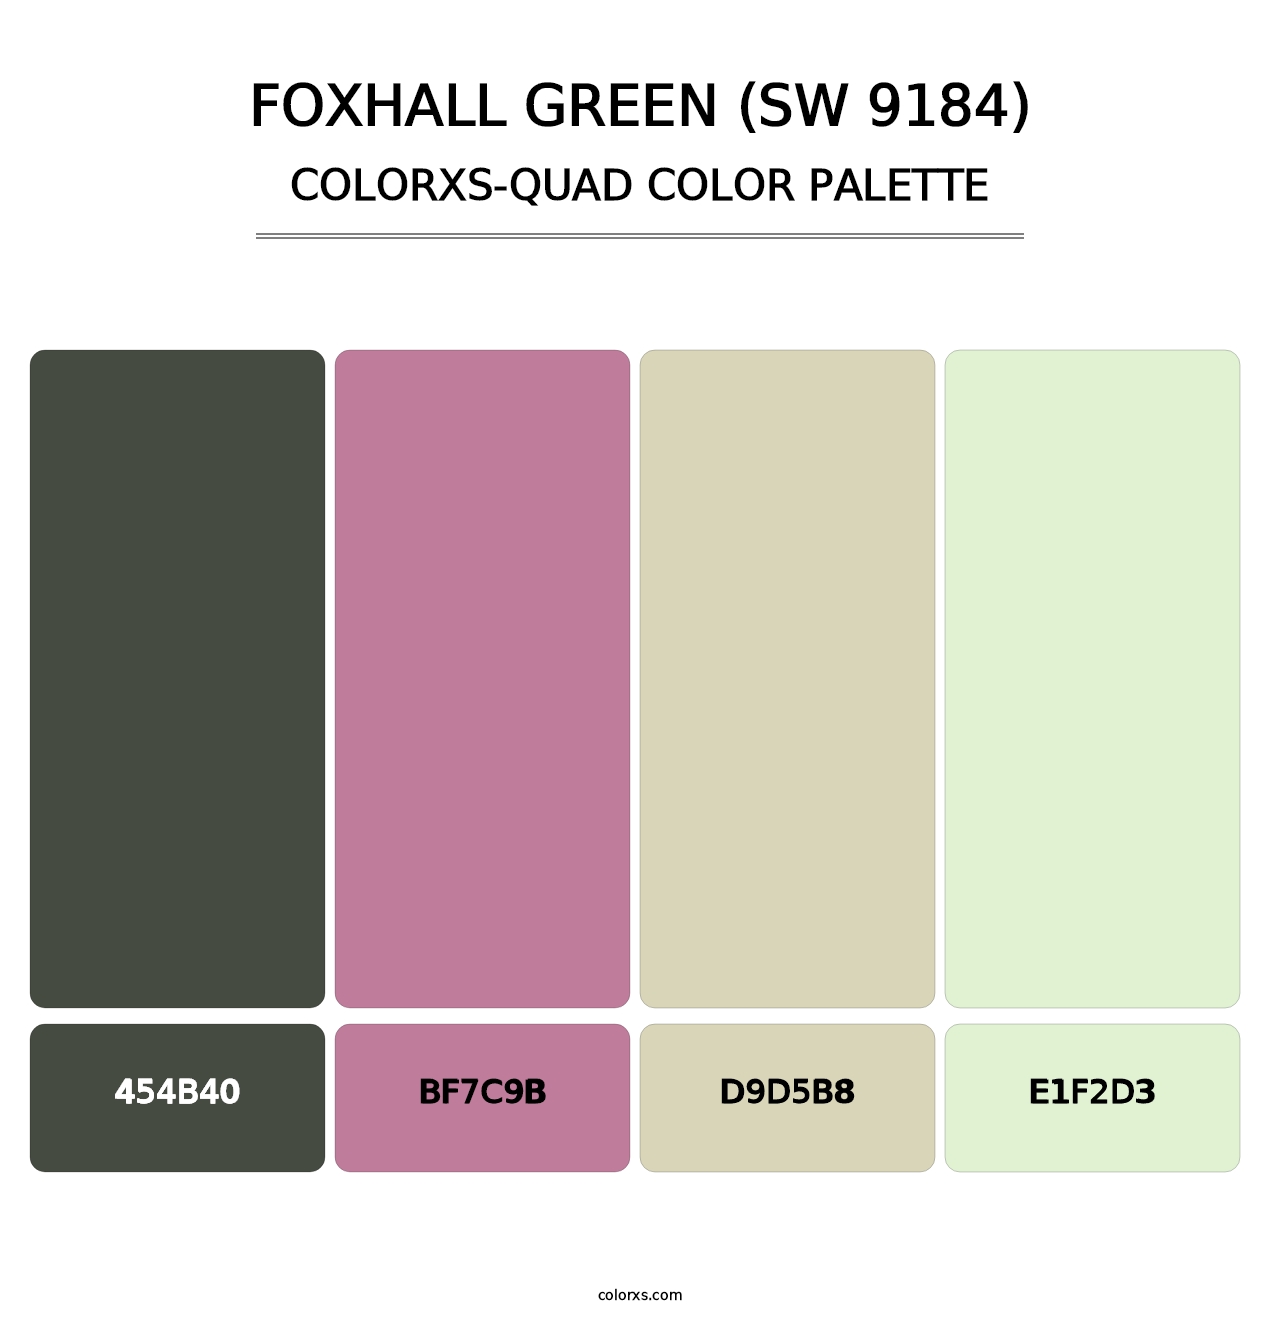 Foxhall Green (SW 9184) - Colorxs Quad Palette